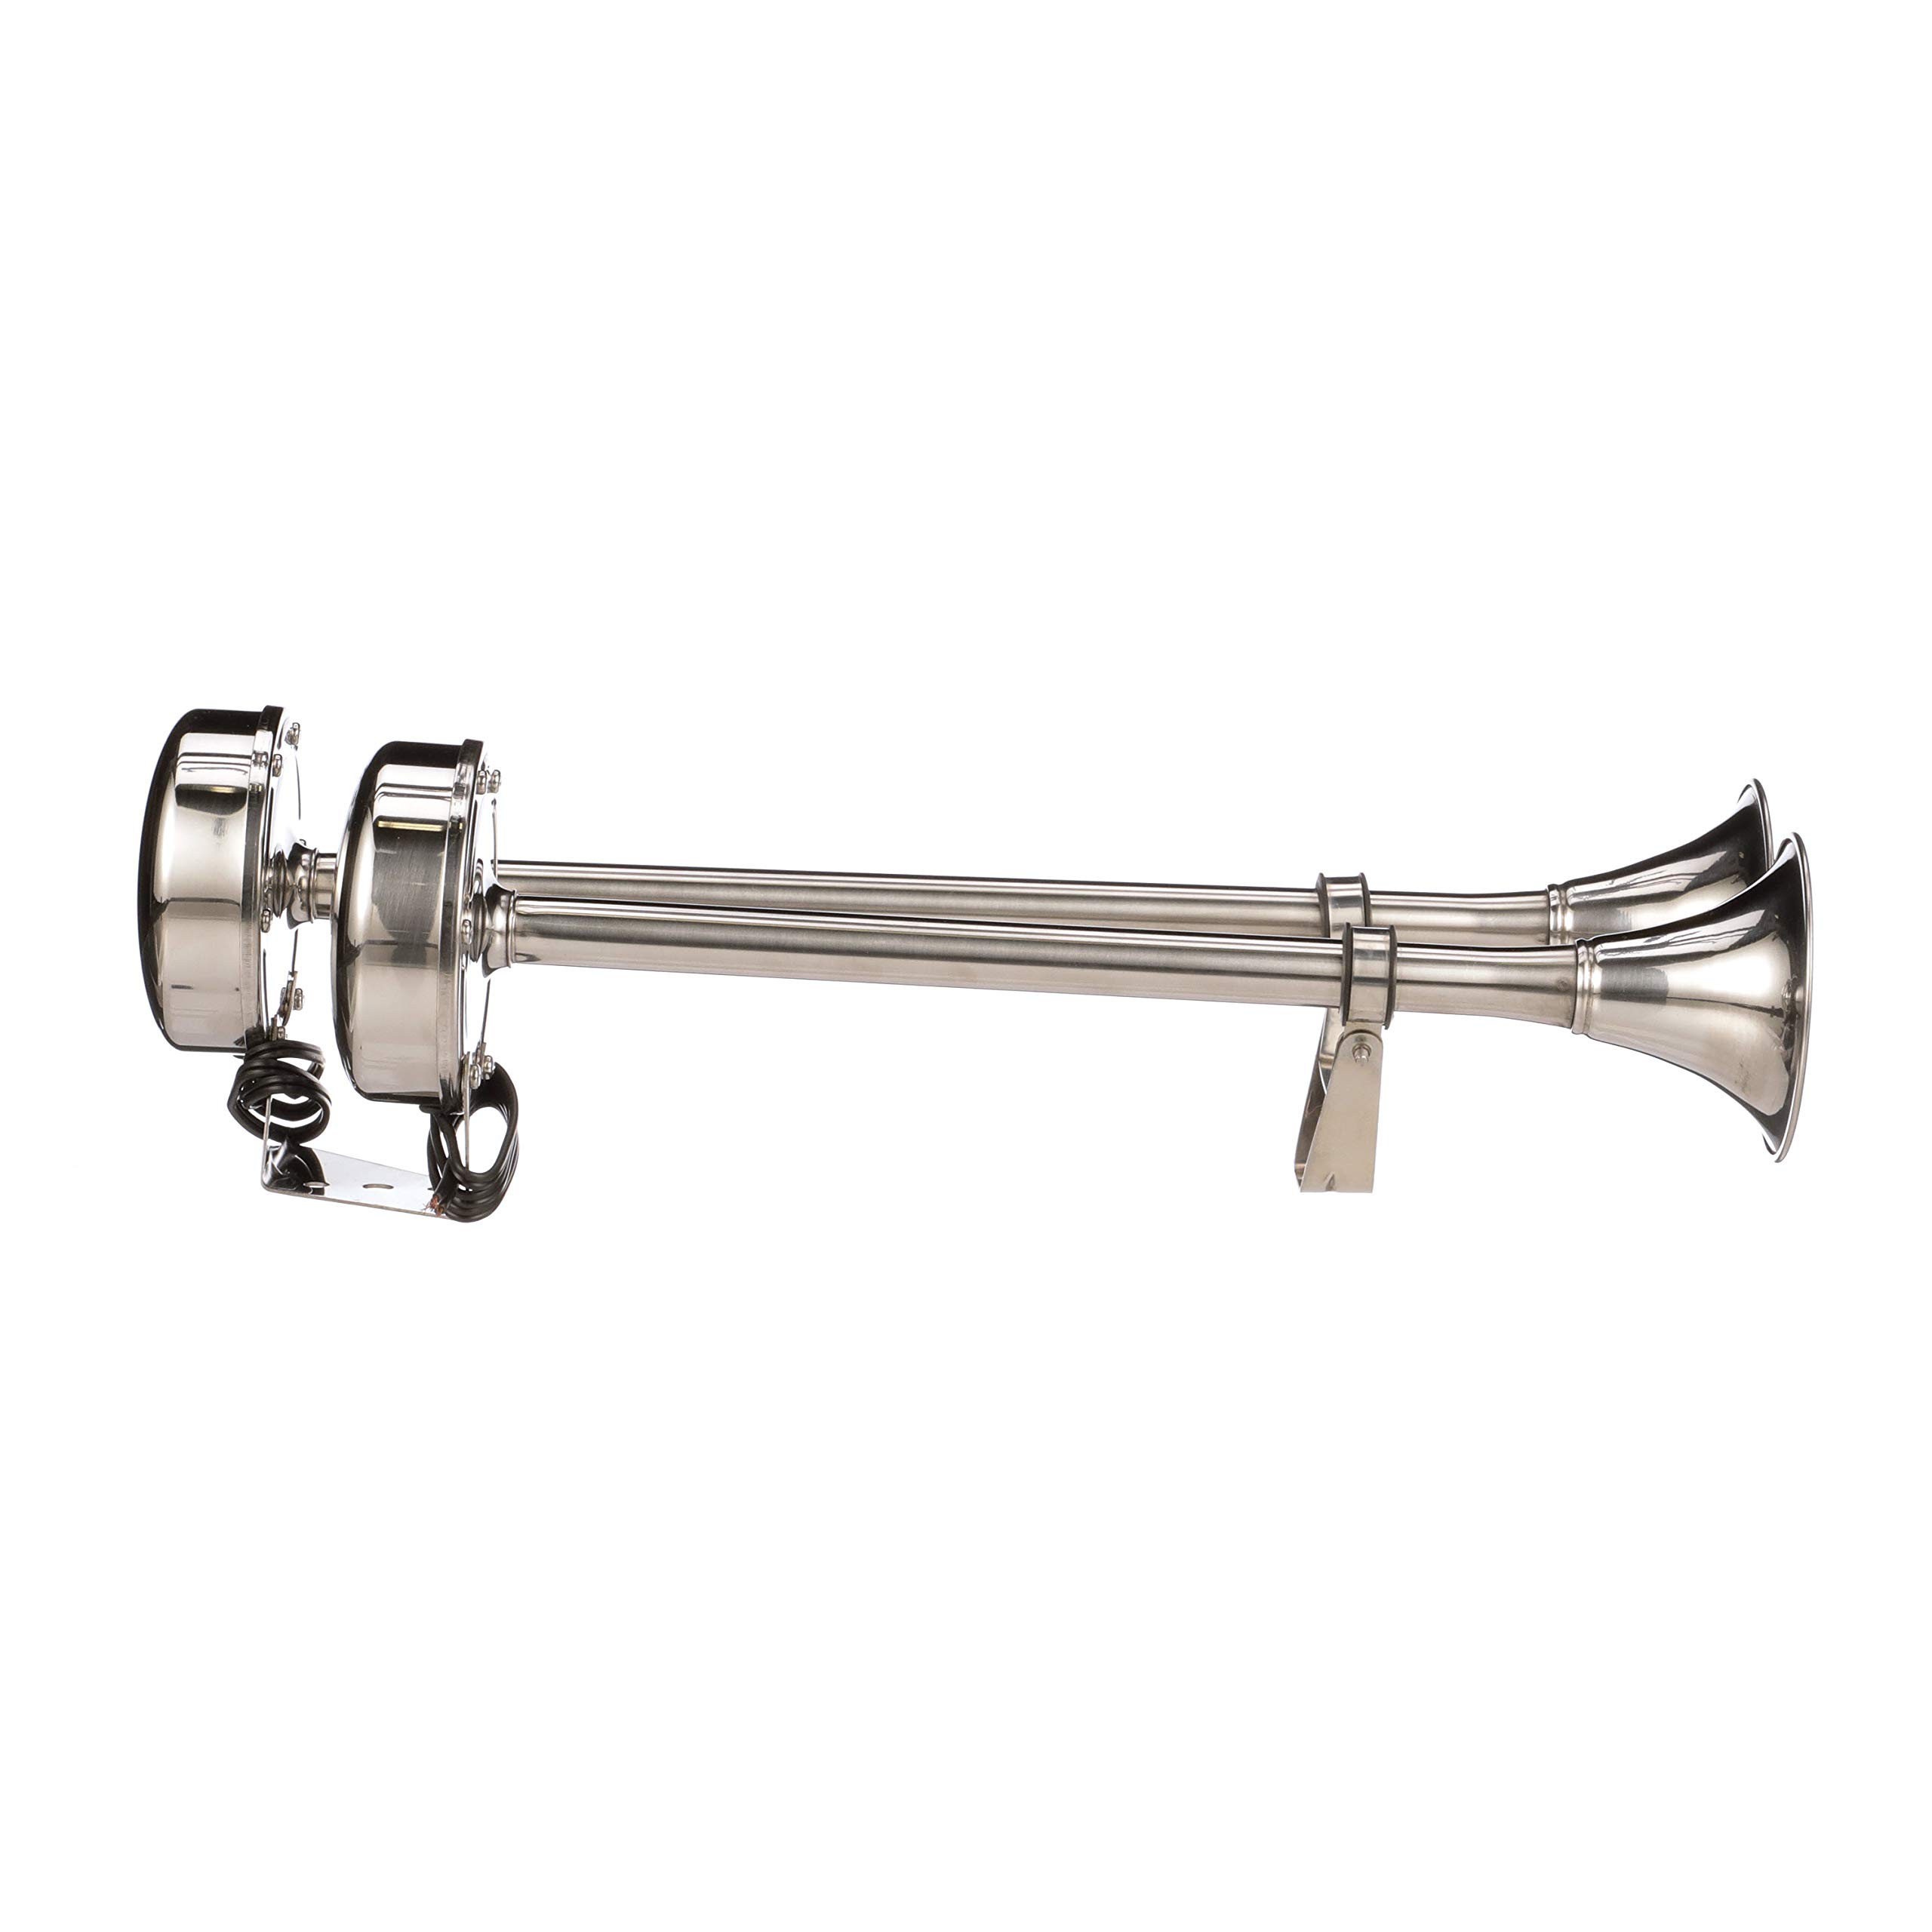 Seachoice Stainless Steel Dual Trumpet Horn, Vibration-Free Mounting Pad, 20-3/4 in. Long, 12V